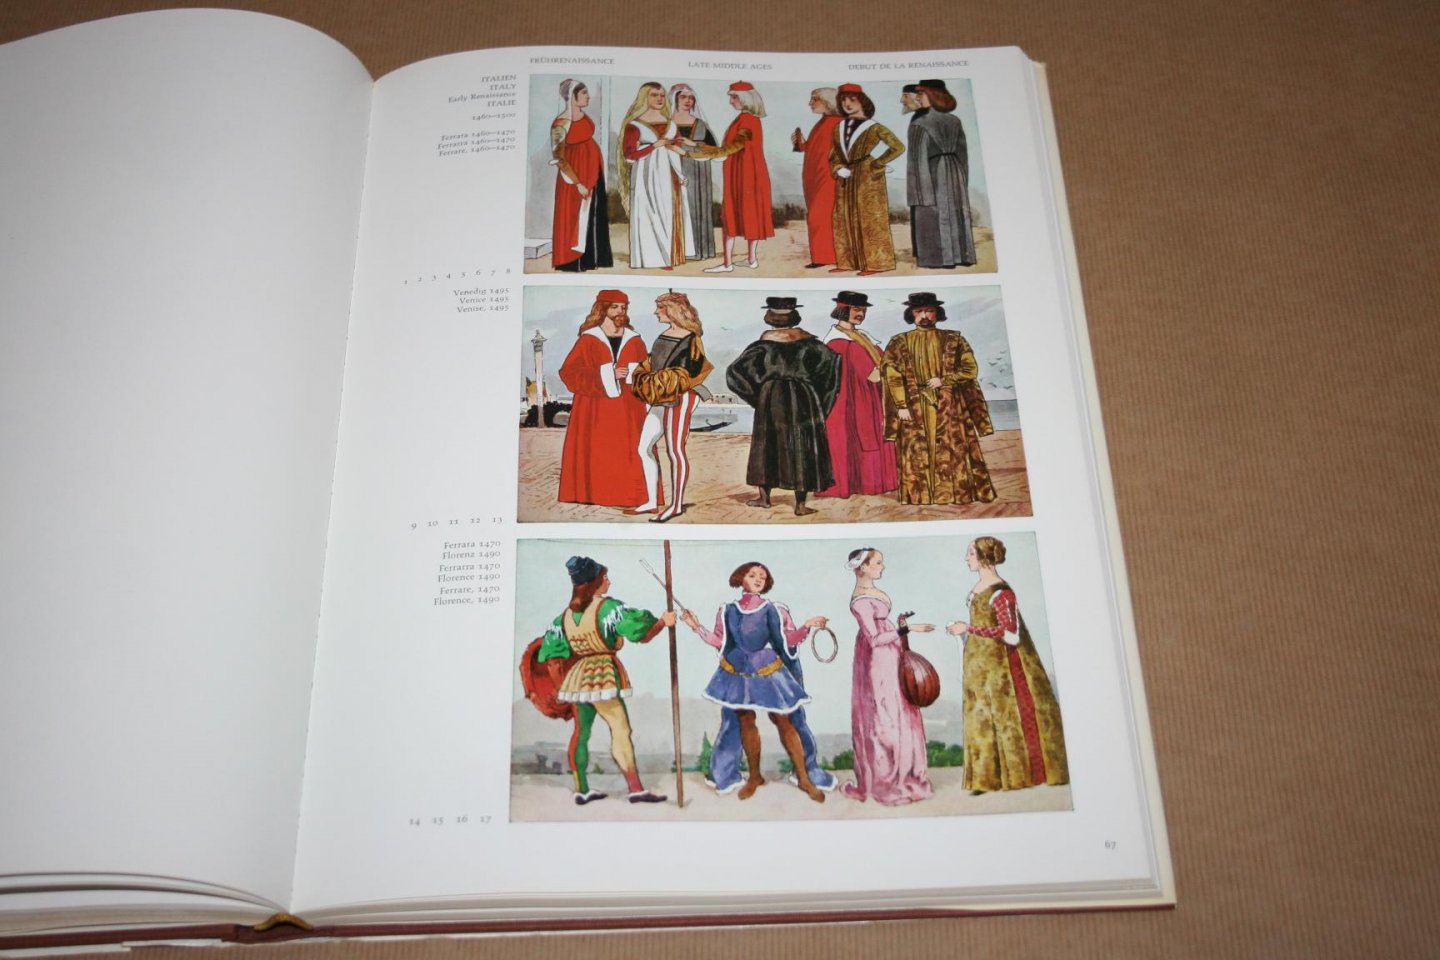 Bruhn & Tilke - A Pictorial History of Costume  --  A survey of costume of all periods and peoples from antiquity to modern times including national costumes in Europe and Non-European countries